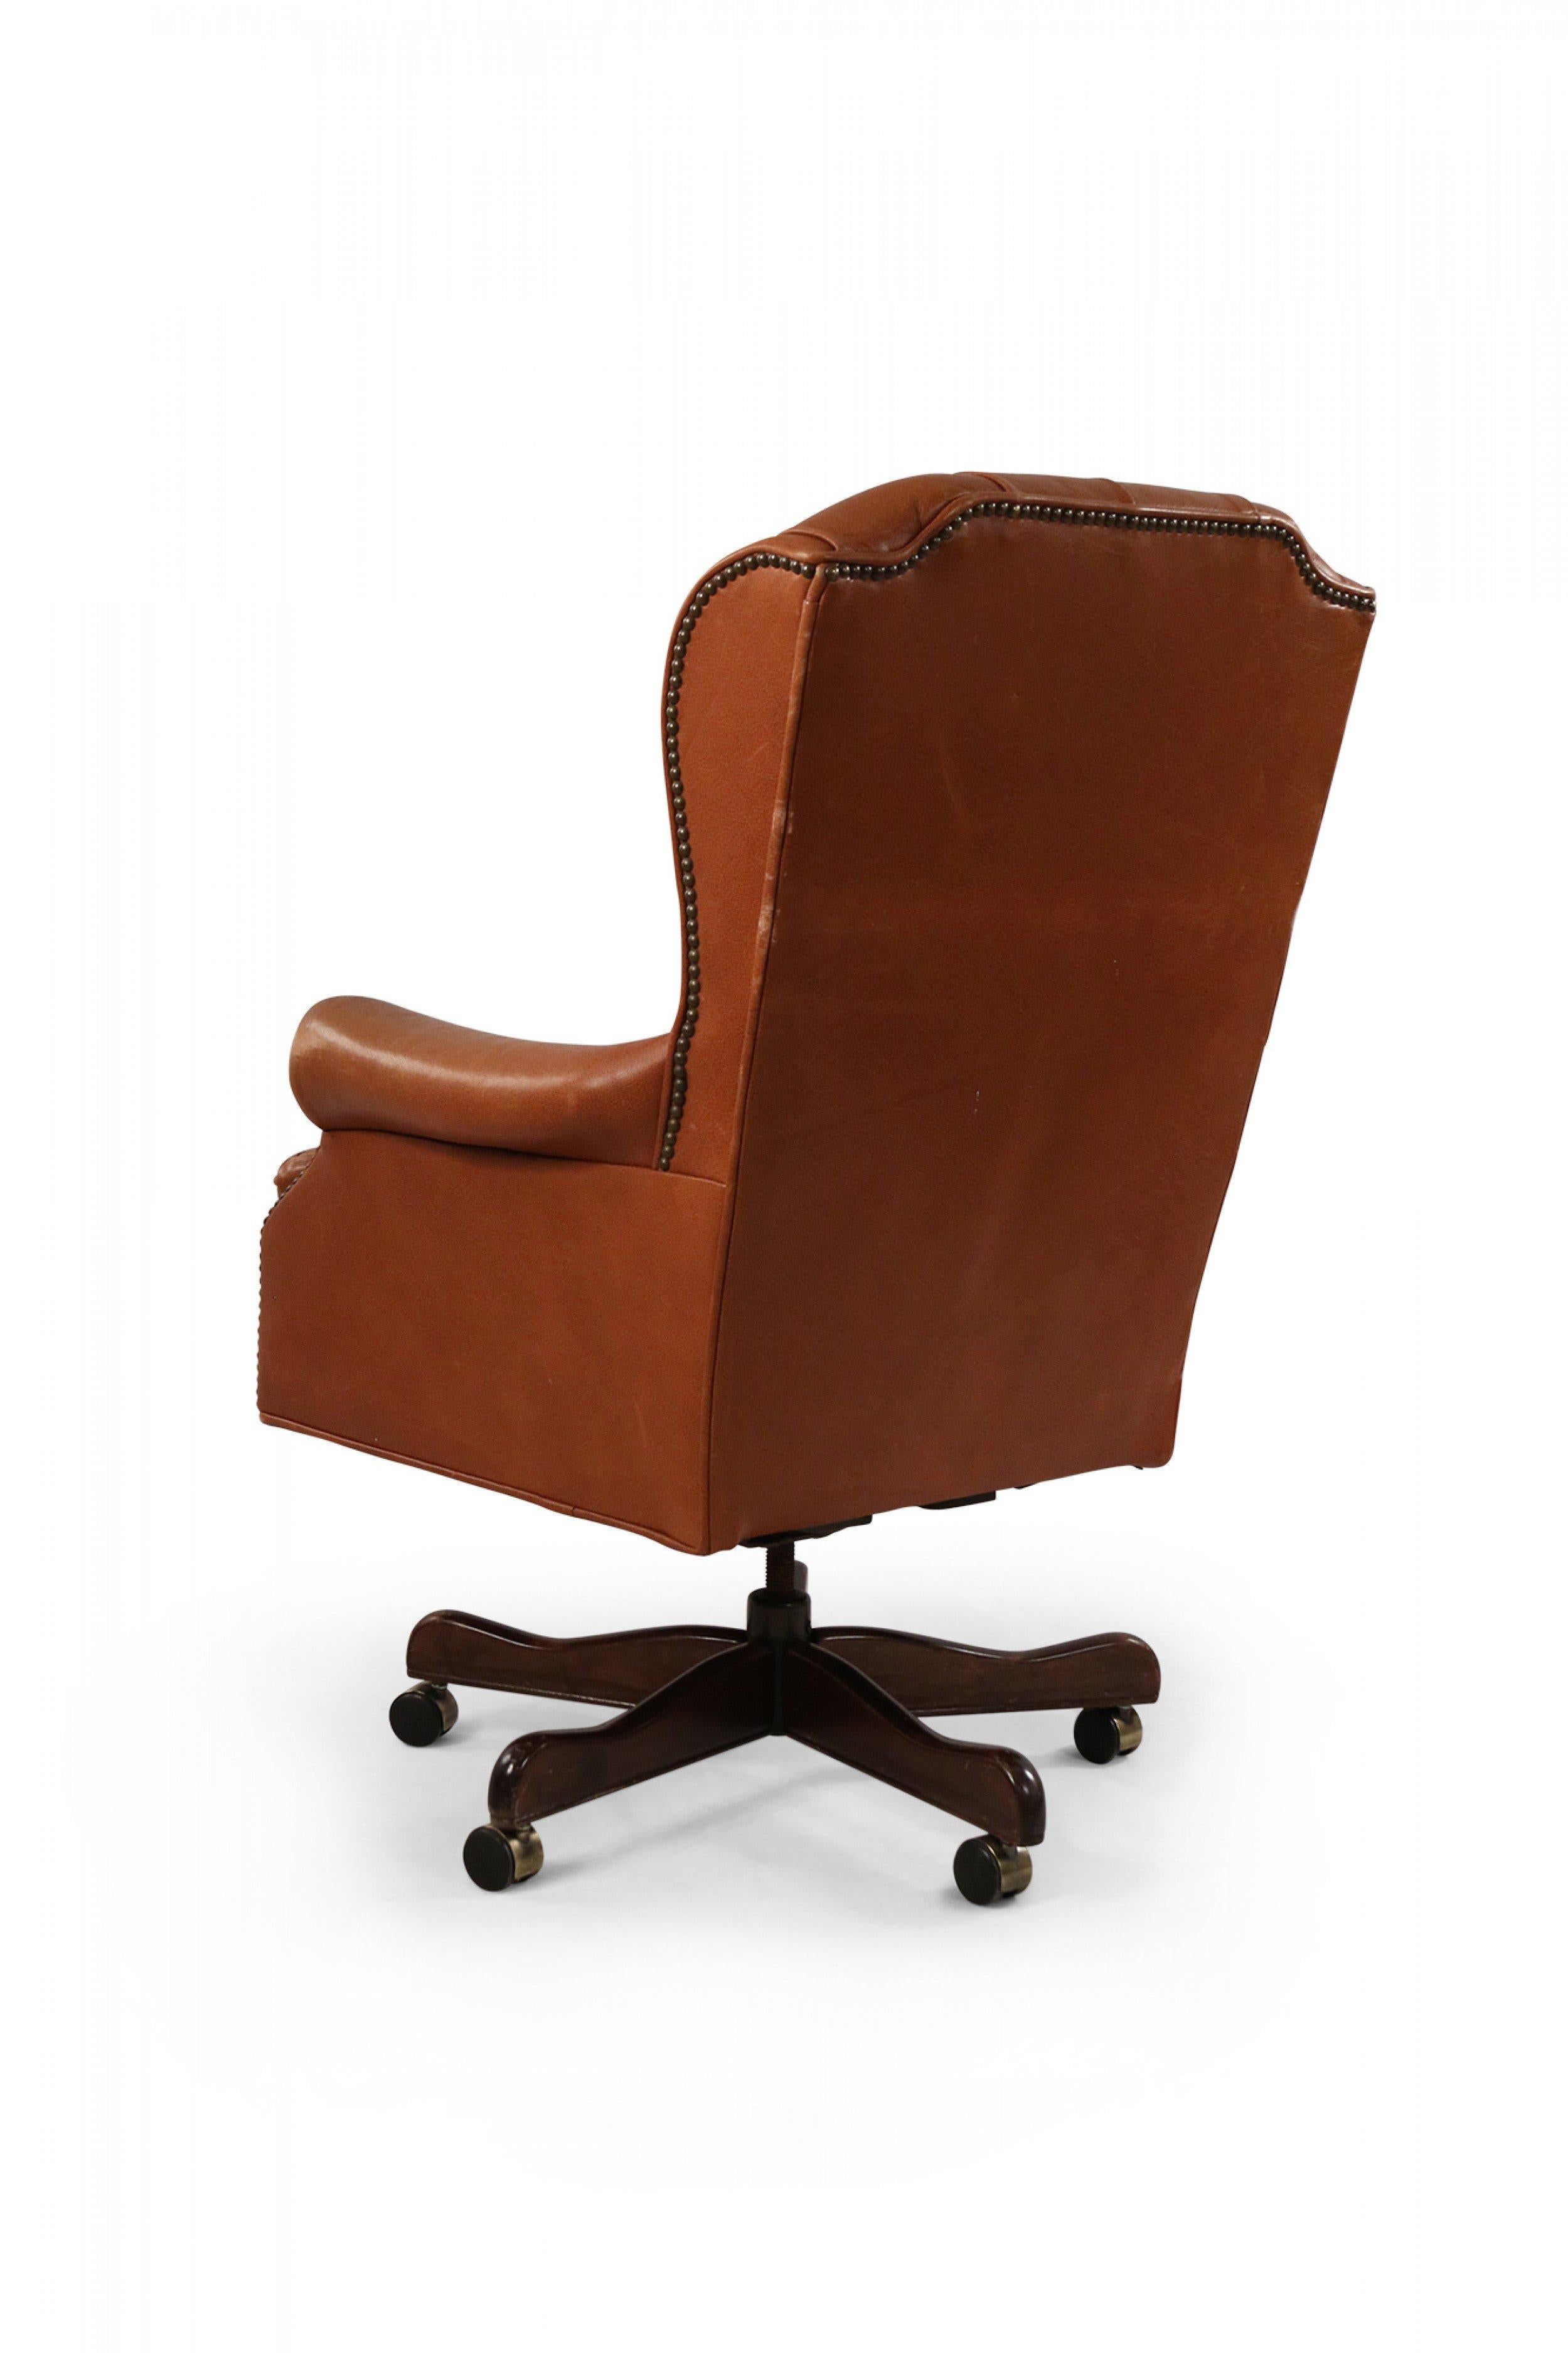 Mid-Century American Brown Tufted Leather Swivel Office / Armchair For Sale 10